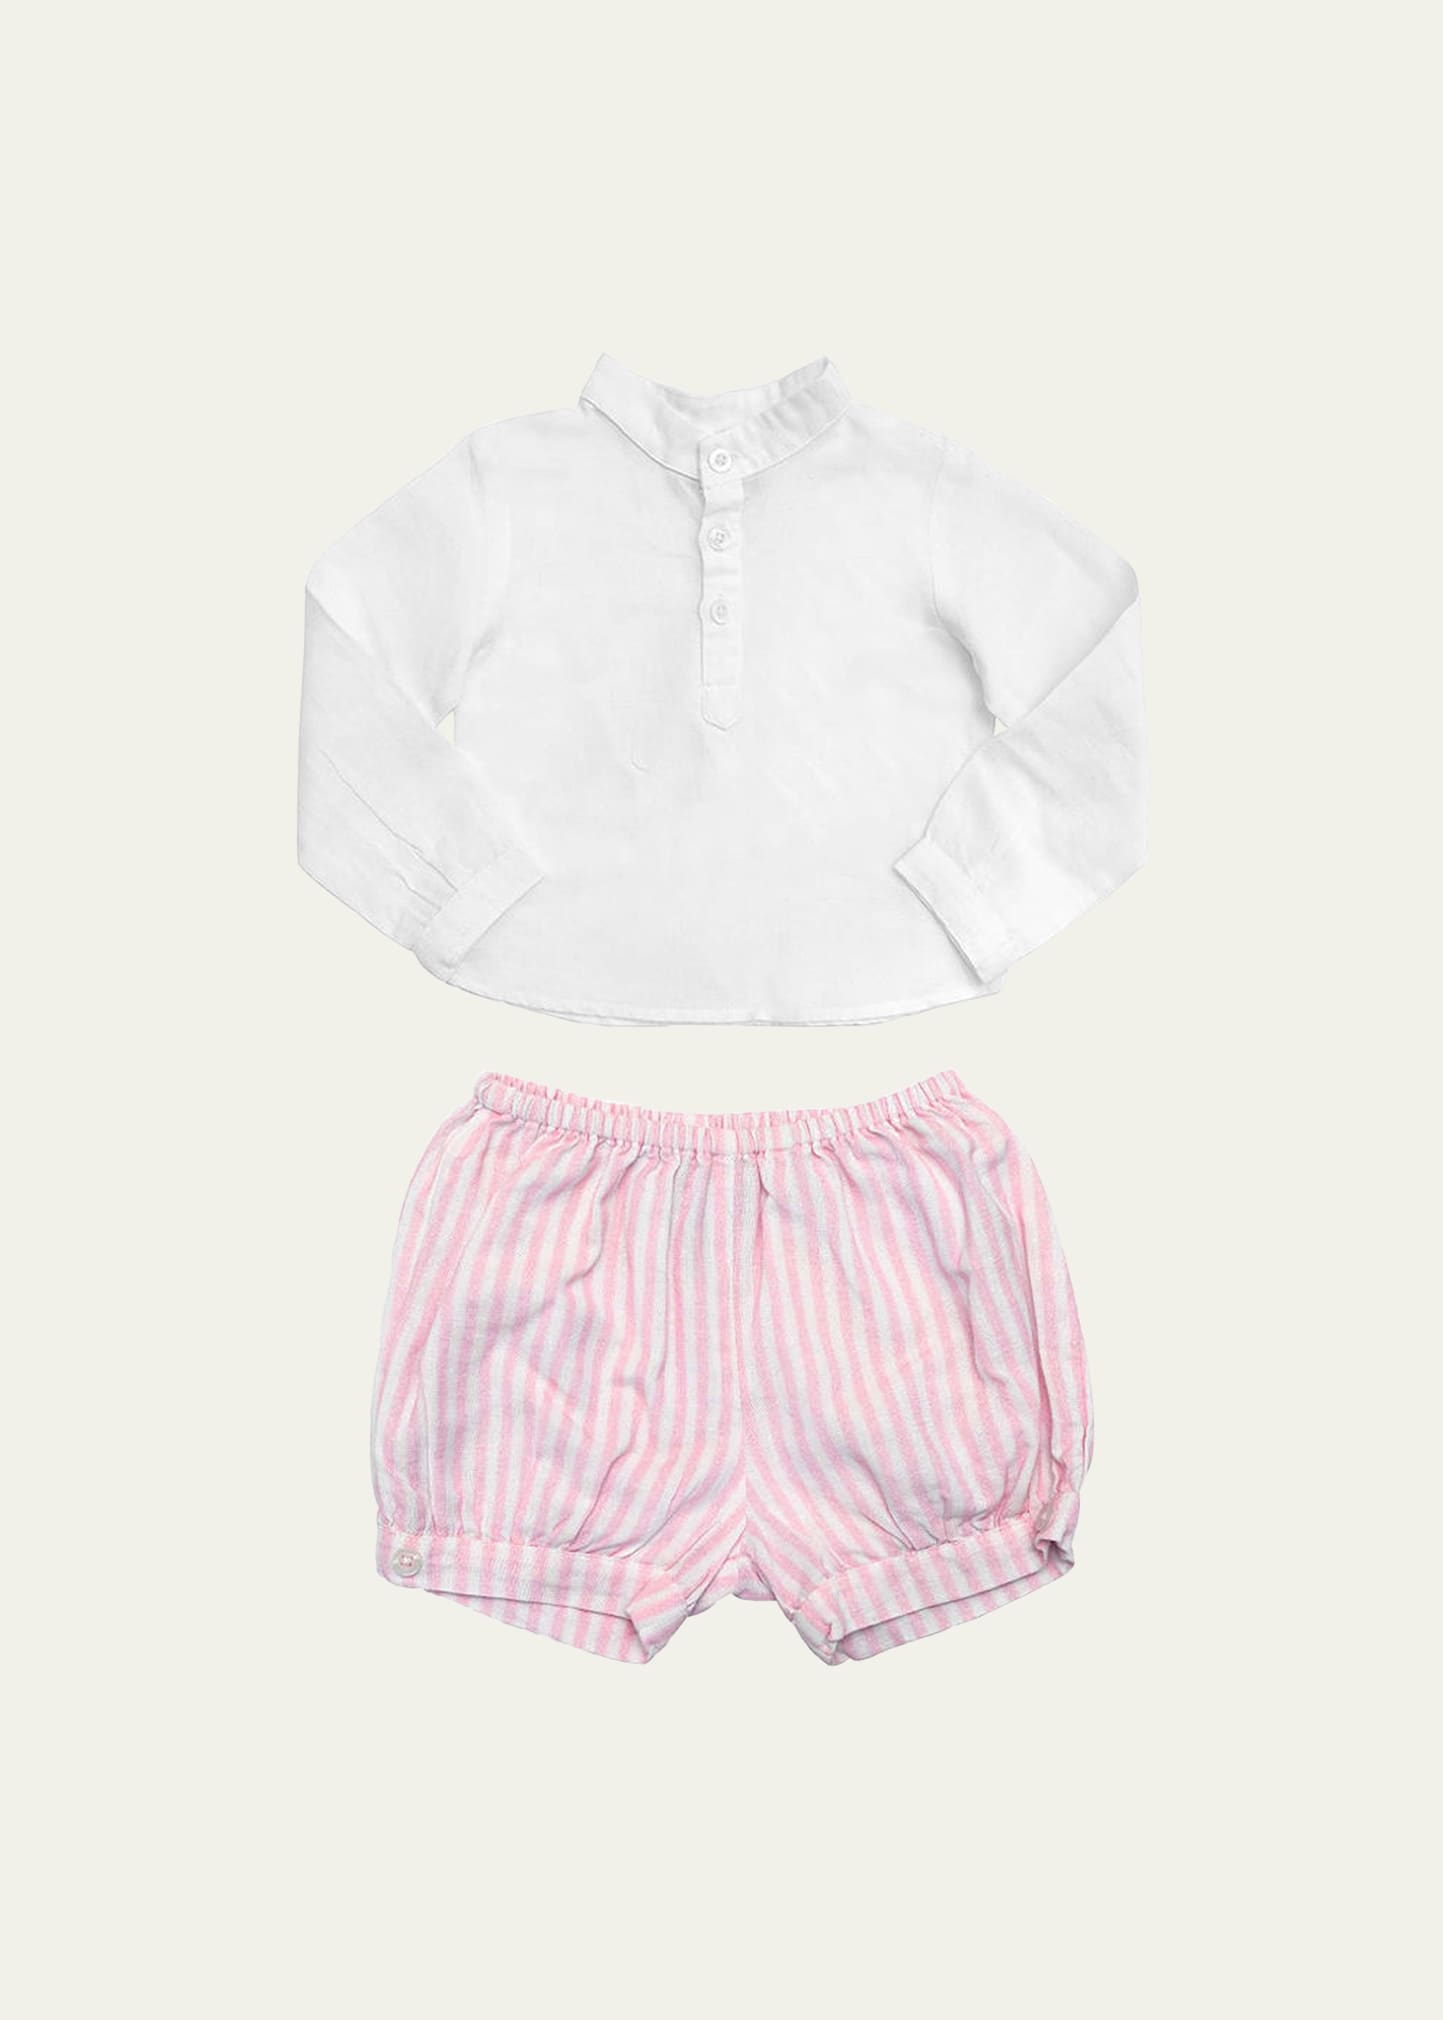 Louelle Girl's Blouse W/ Bloomers Two-piece Set In Blossom Pink